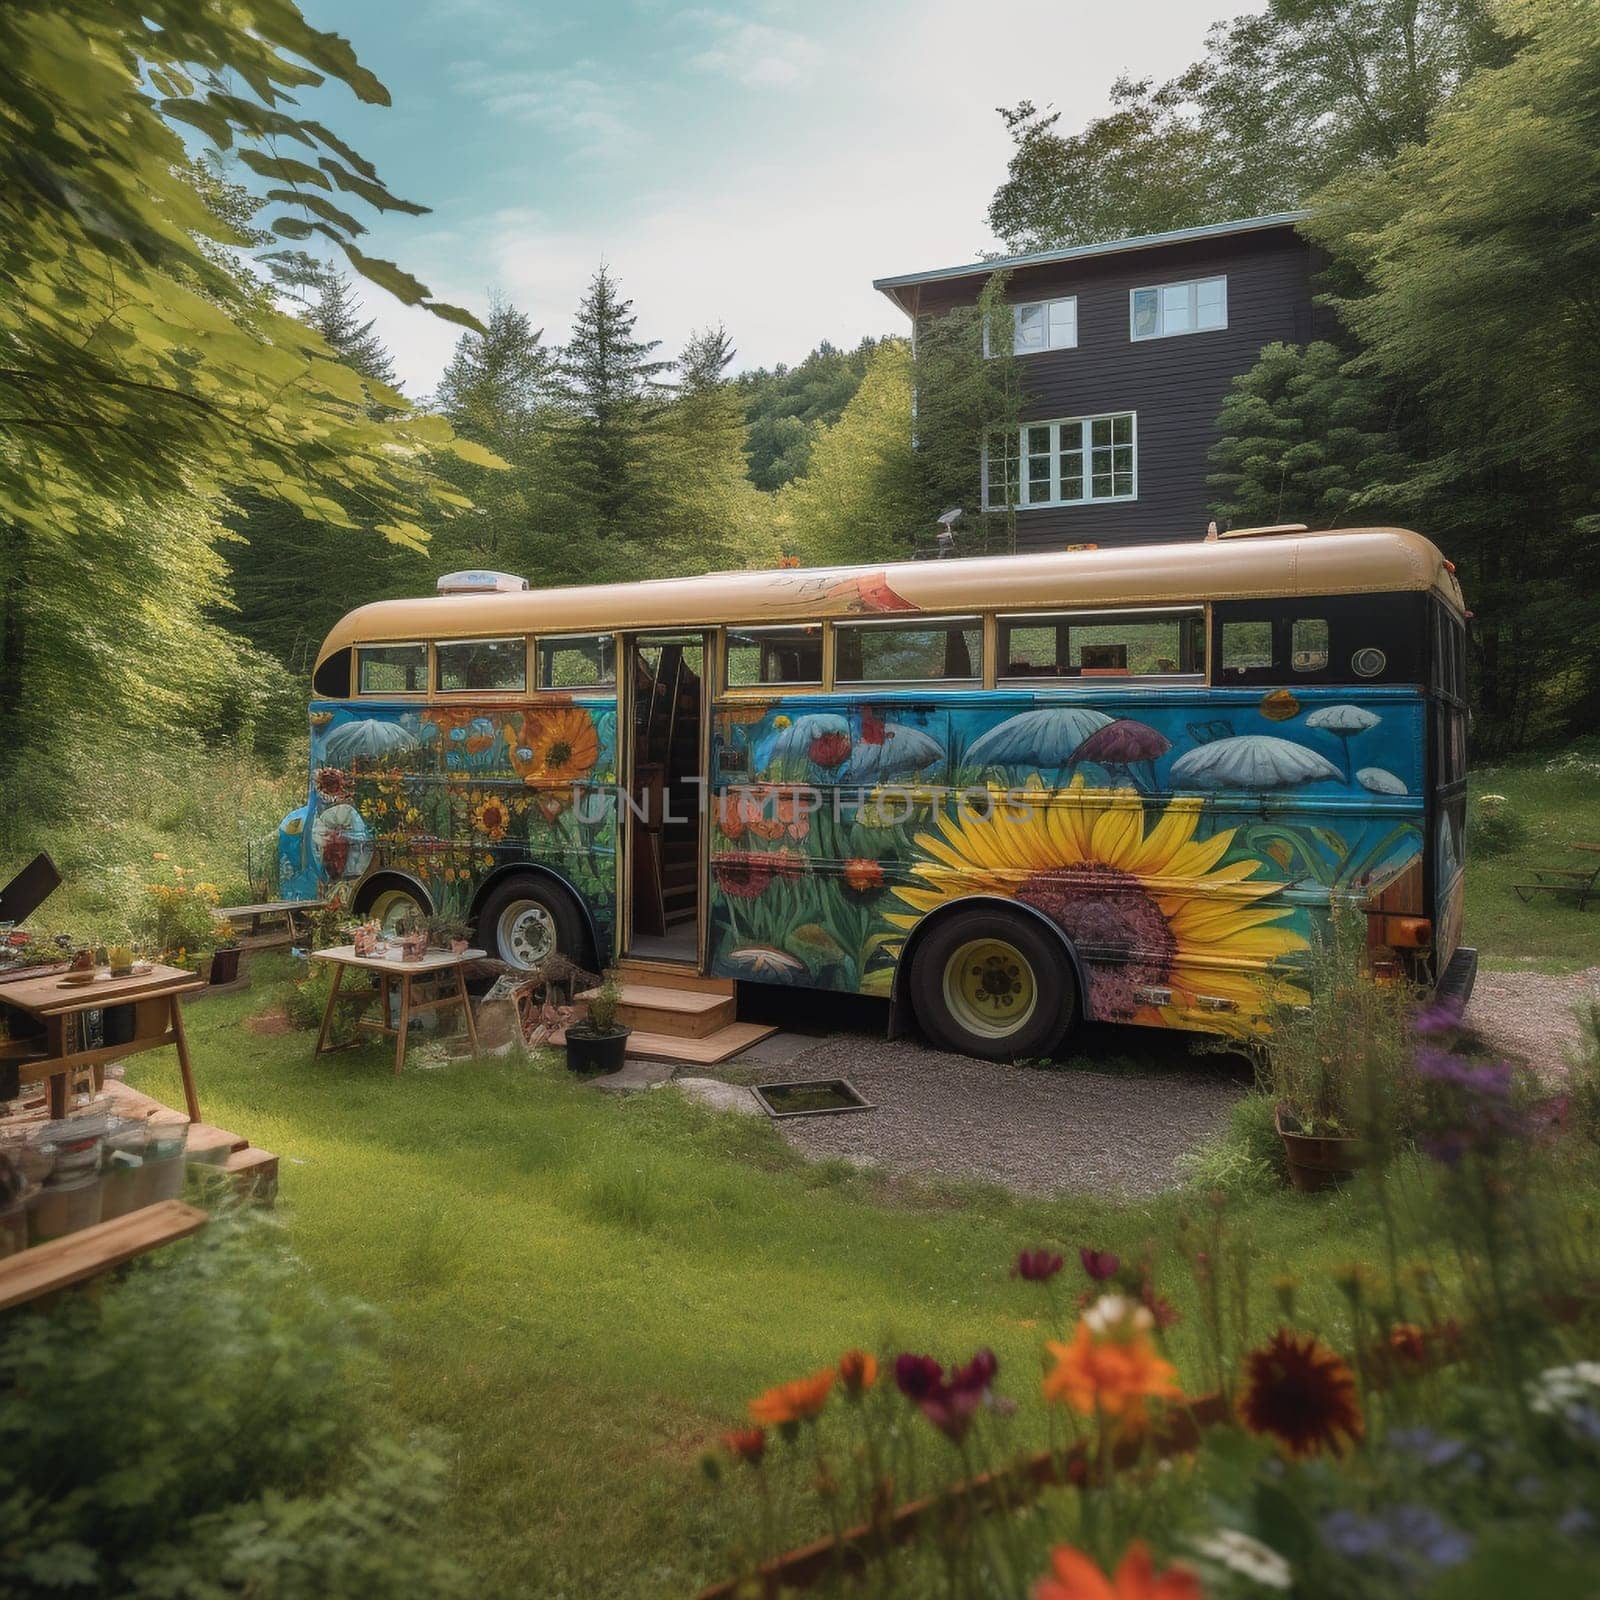 Converted School Bus Parked in a Secluded Meadow with Mural and Vegetable Garden by Sahin